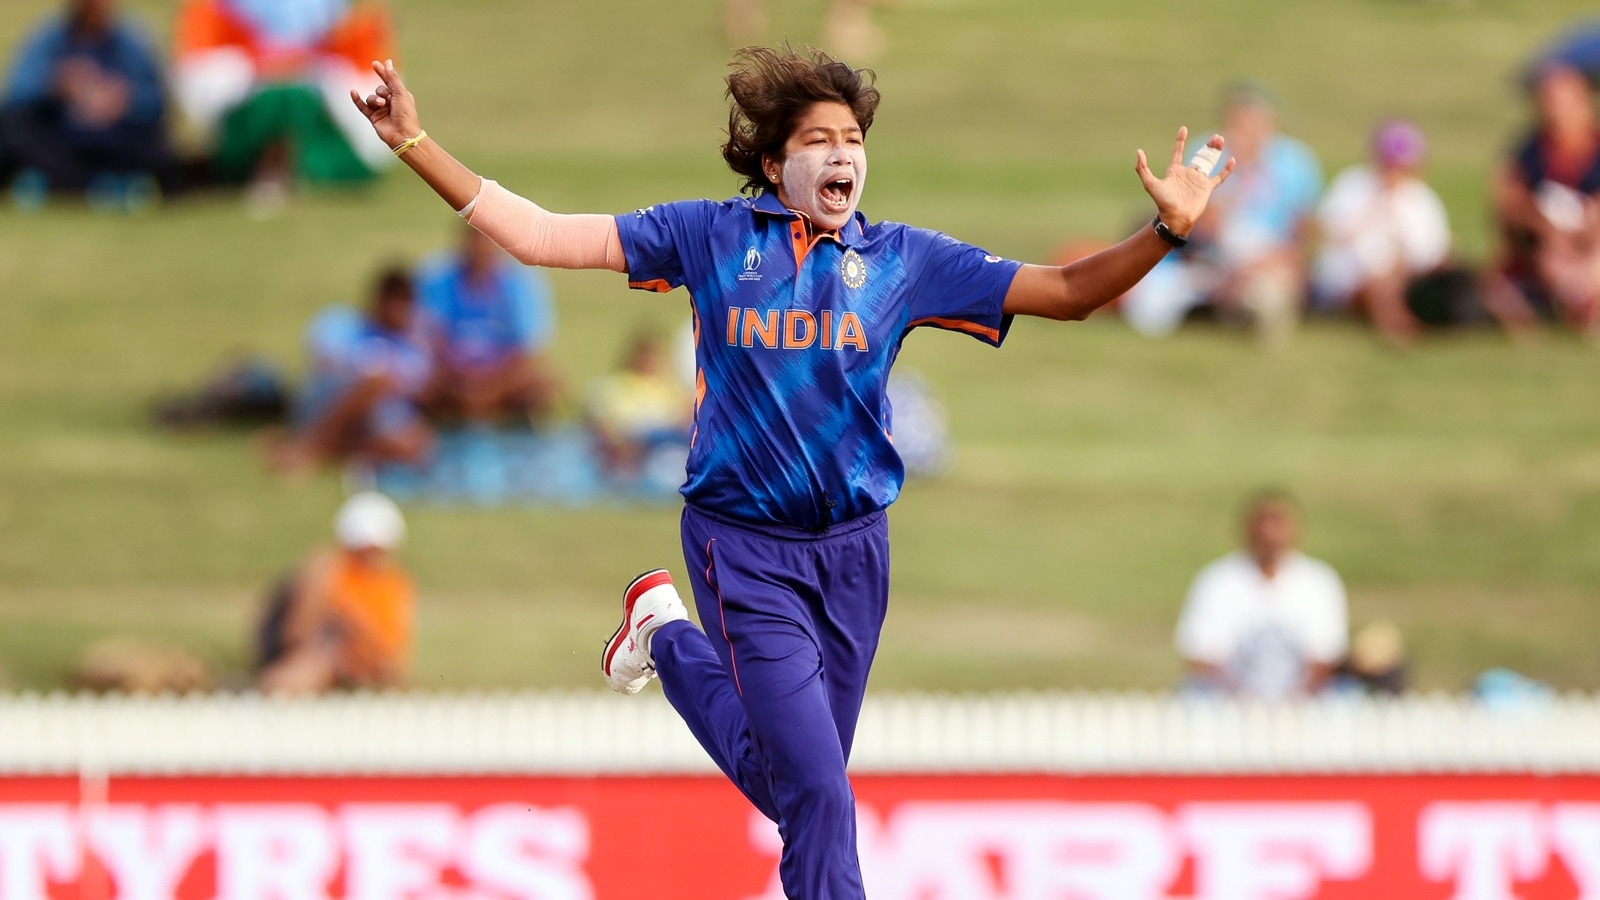 jhulan-goswami-to-retire-from-international-cricket-after-india-women-s-3rd-odi-vs-england-at-lord-s-report